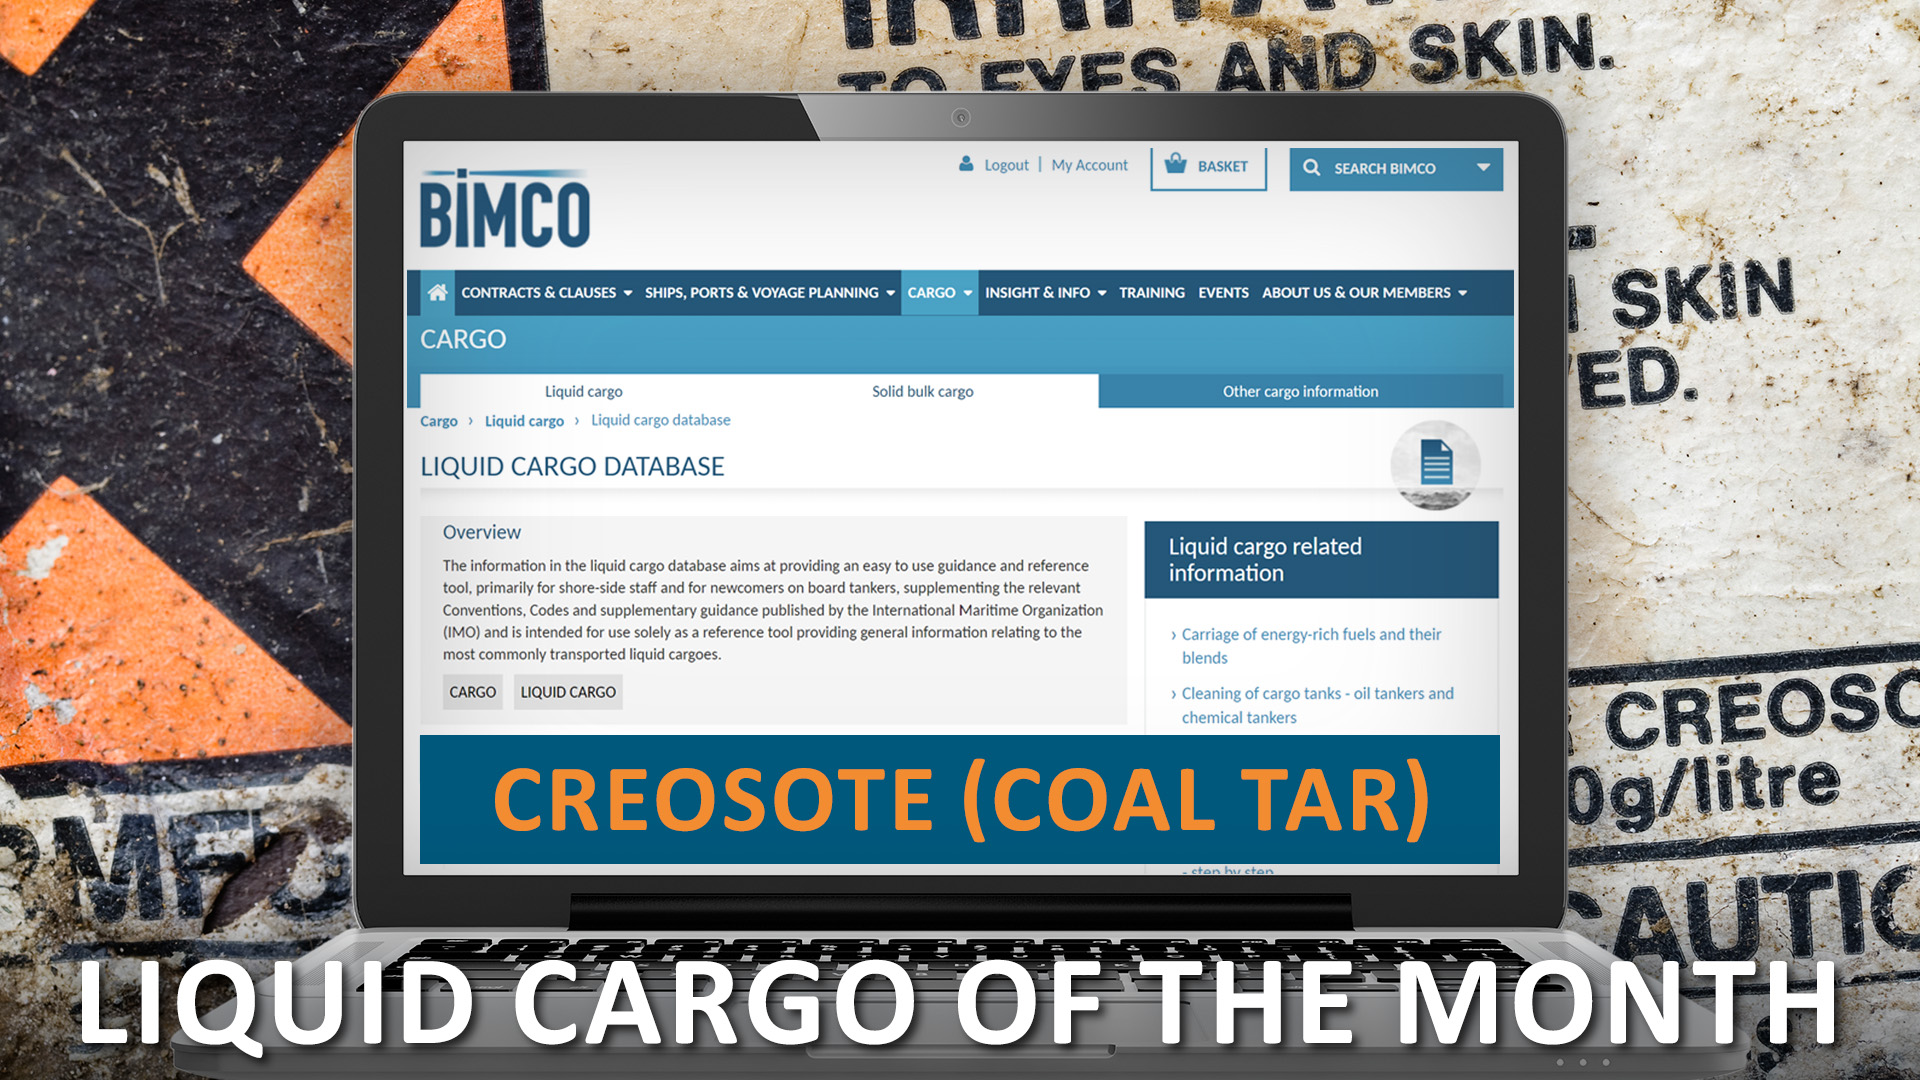 BIMCO website's liquid cargo of the month, creosote (coal tar) on a laptop superimposed over a hazard label